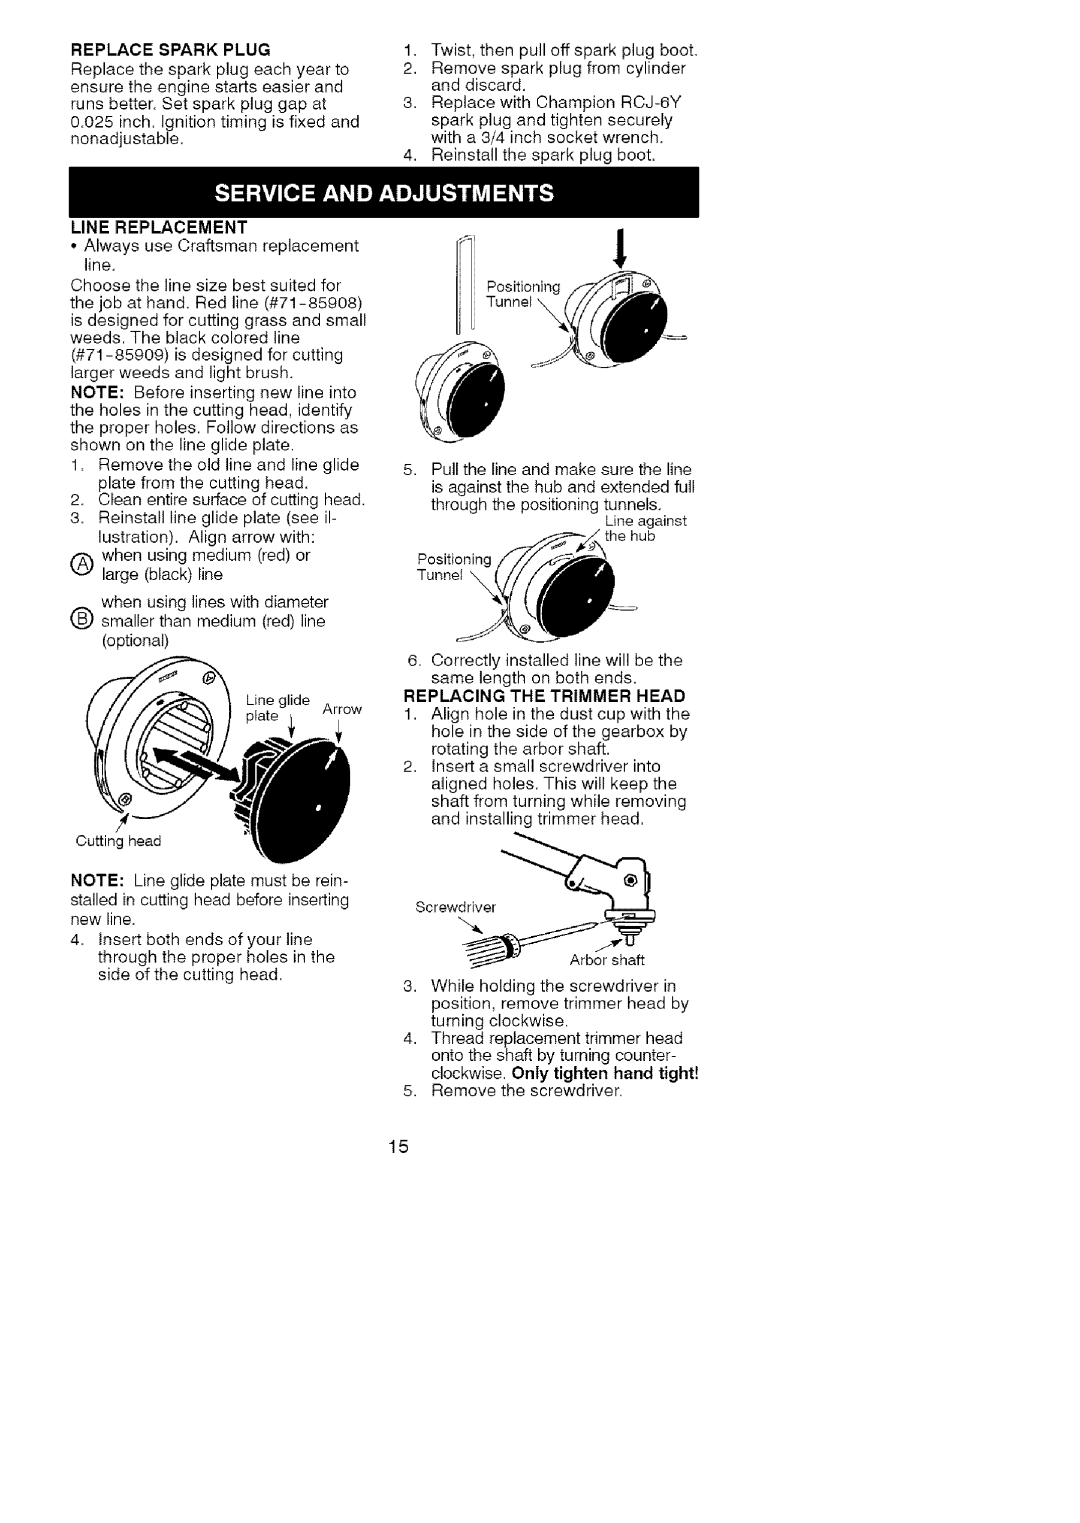 Craftsman 358.791071 operating instructions Replace Spark Plug, Line Replacement, Replacing The Trimmer Head 